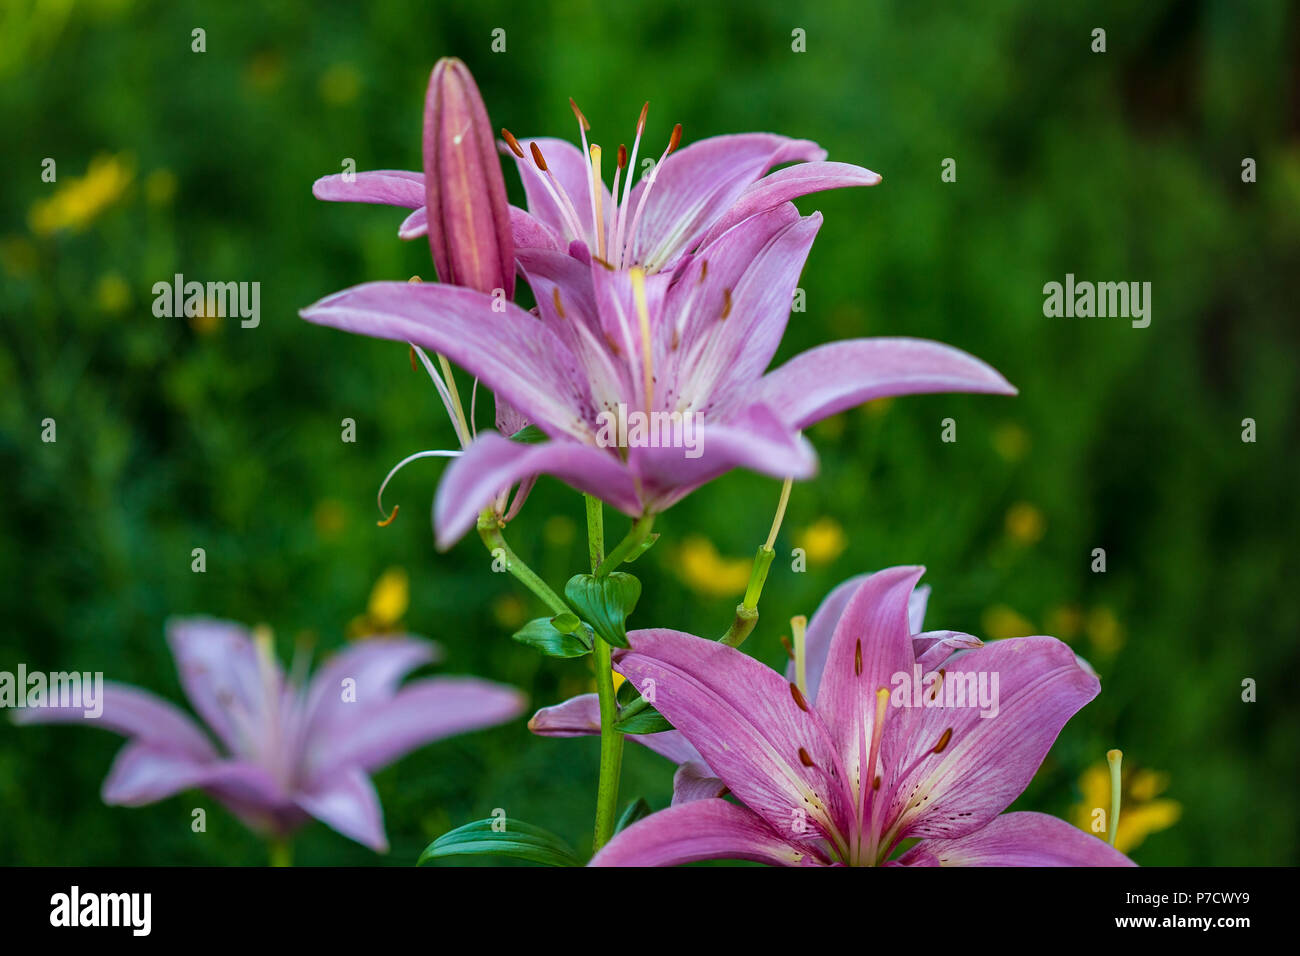 the view from the pink lily section of the garden at sunrise Stock Photo